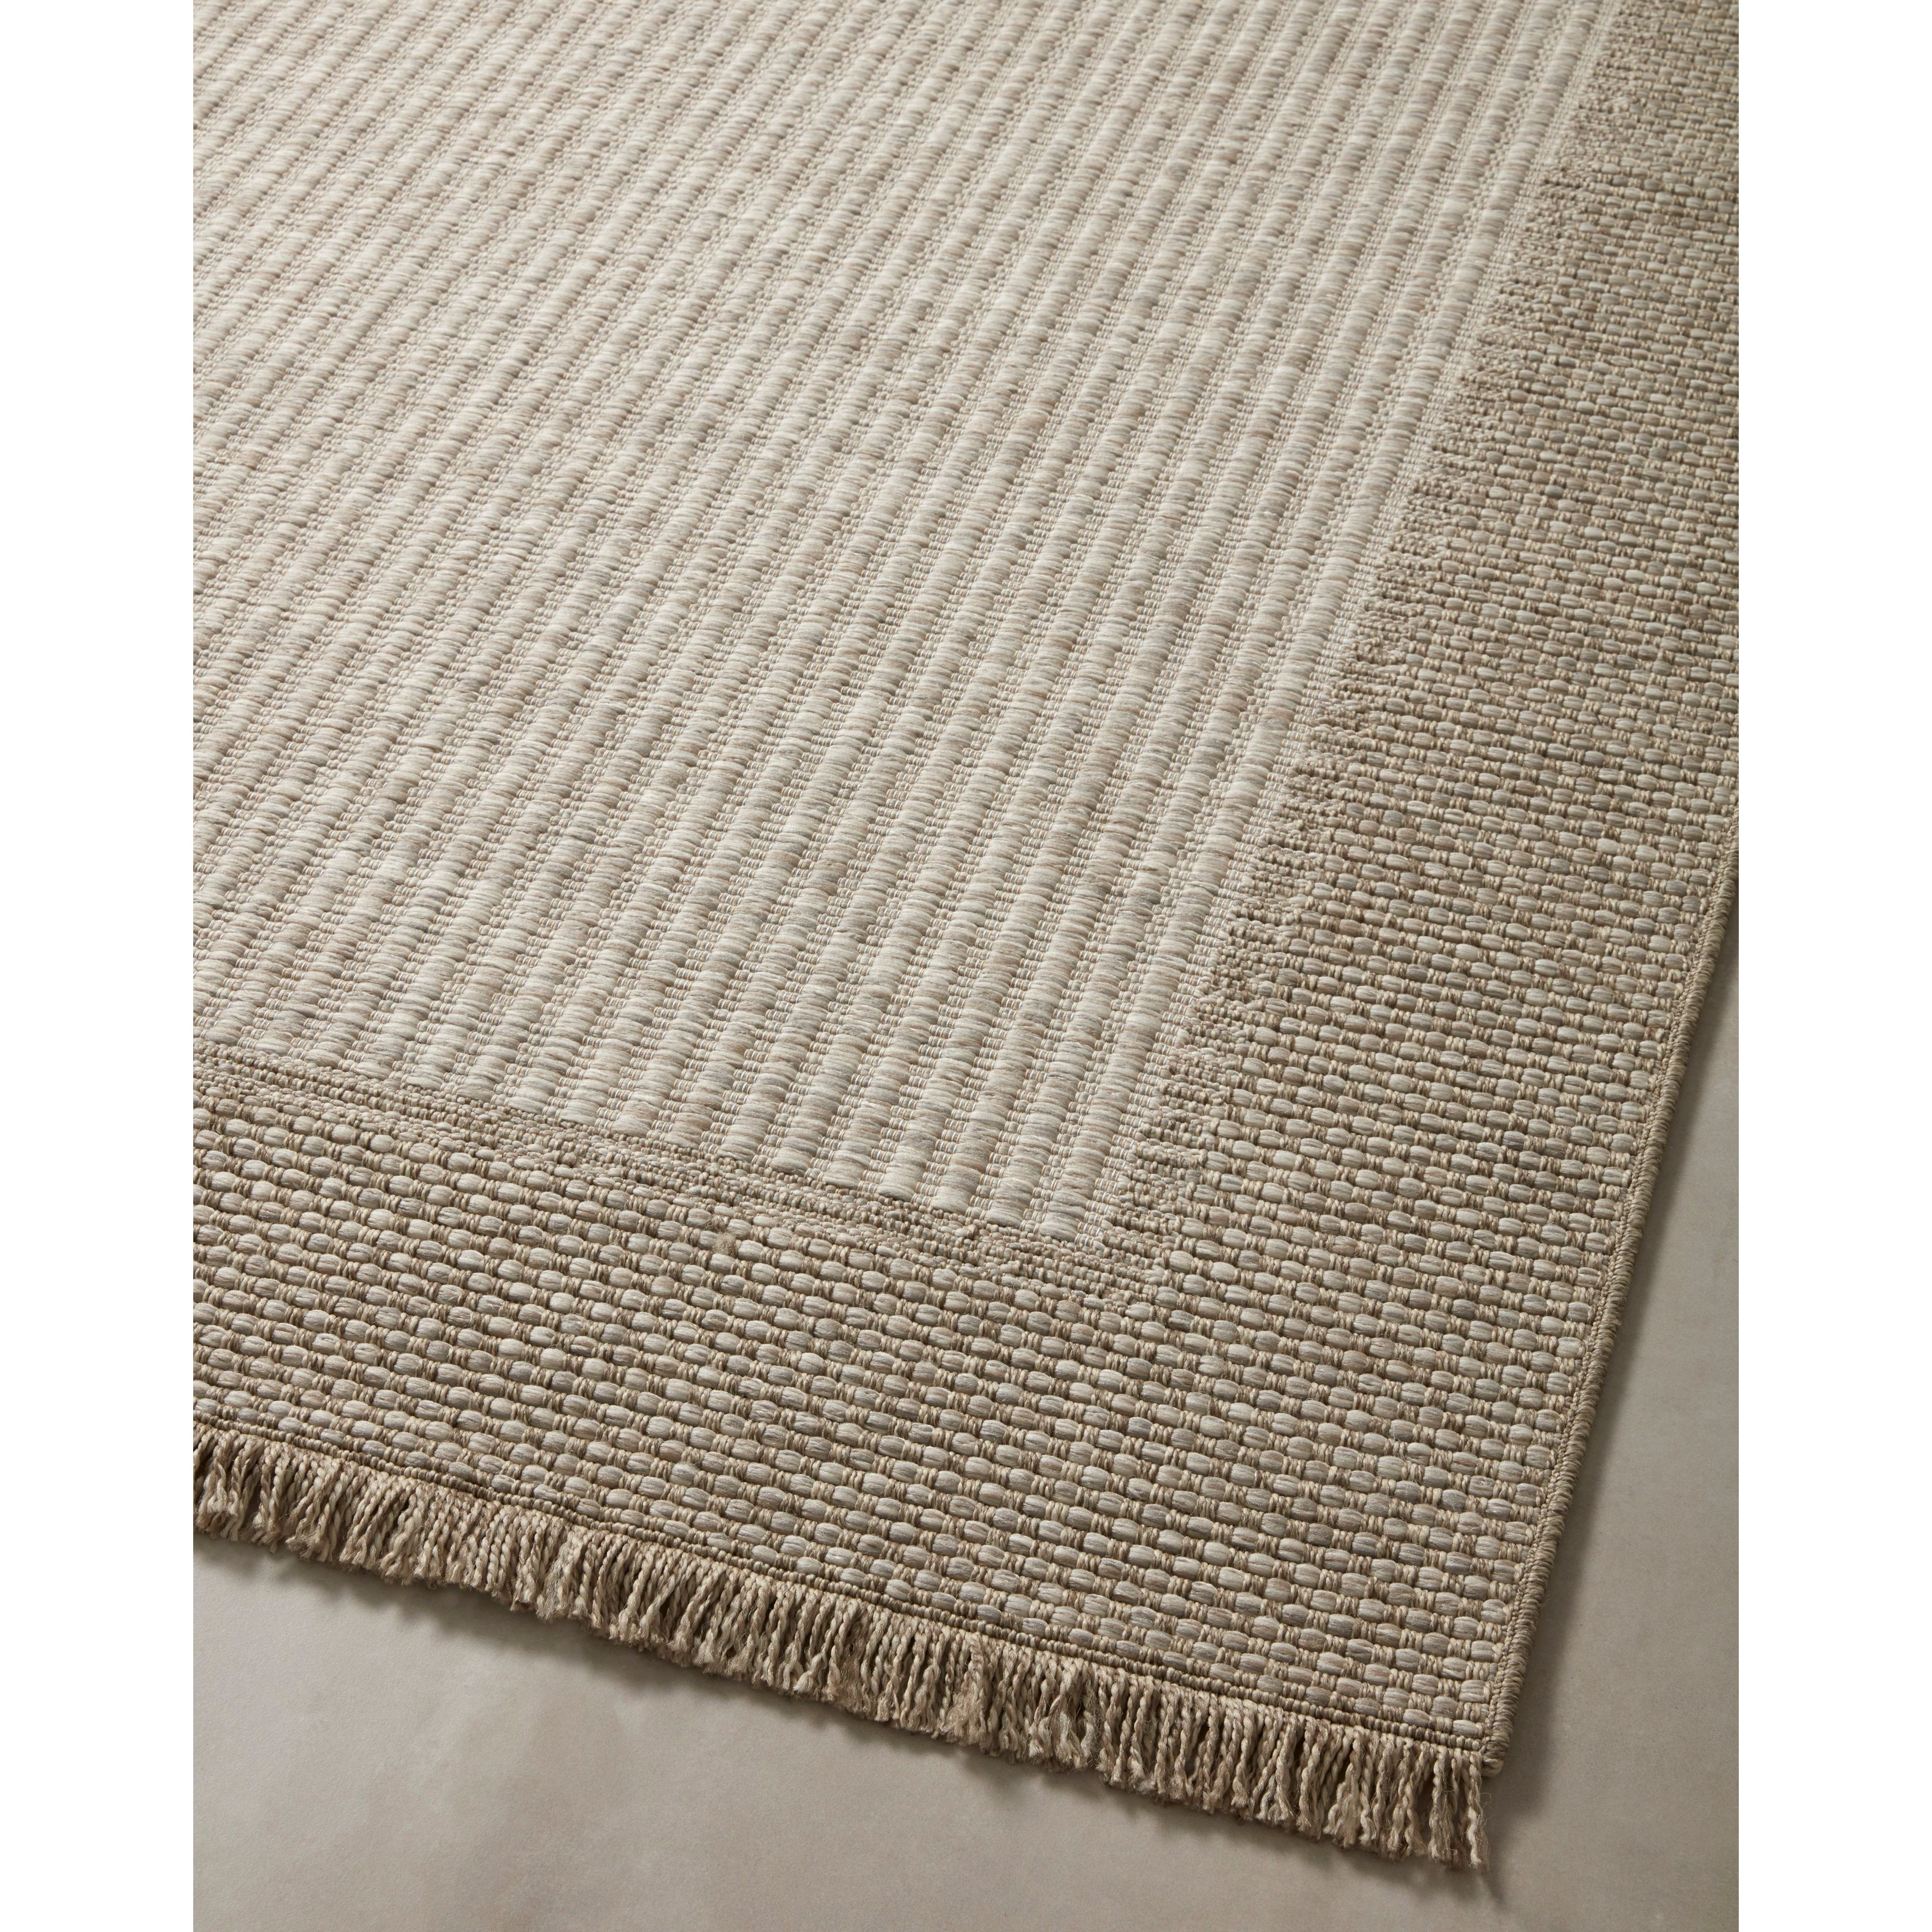 Made for sunny days ahead, the Dawn Collection is an indoor/outdoor rug that looks like a woven sisal rug but is power-loomed of 100% polypropylene, which makes it water- and mildew-resistant (so it's ready for rainy days ahead, too). Amethyst Home provides interior design, new home construction design consulting, vintage area rugs, and lighting in the Dallas metro area.